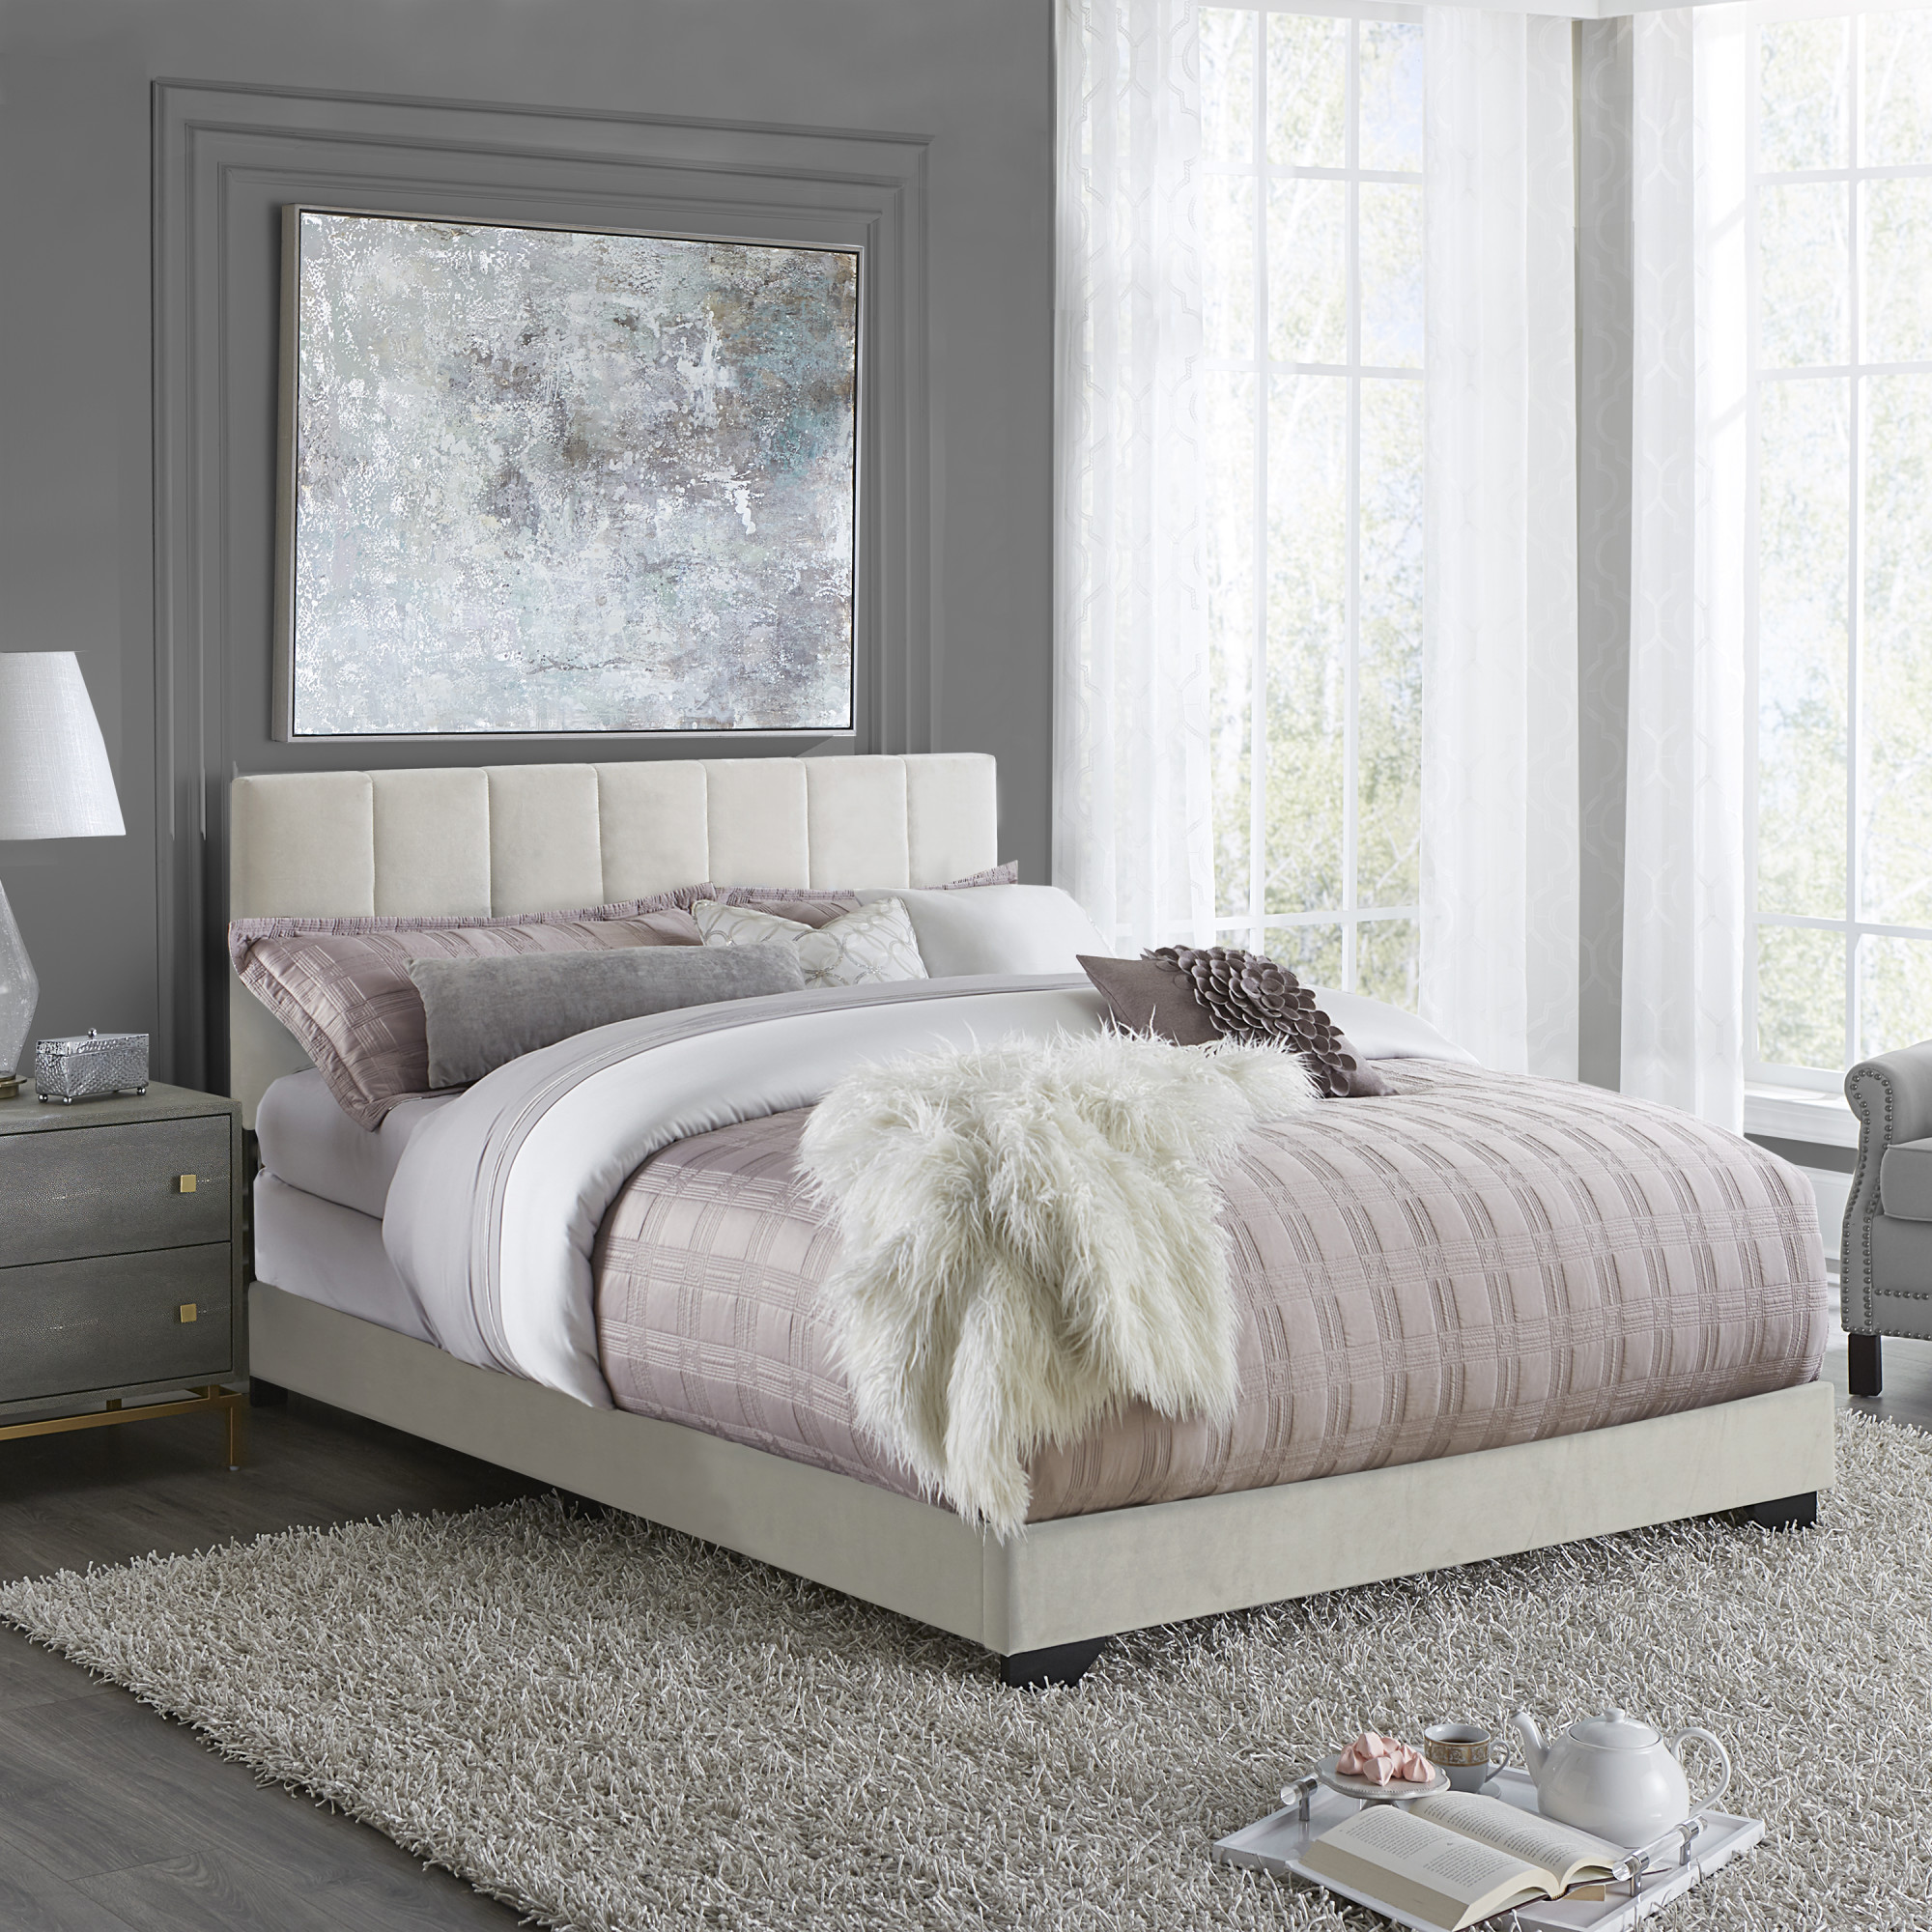 Reece Channel Stitched Upholstered Queen Bed, Ivory, by Hillsdale Living Essentials - image 1 of 17